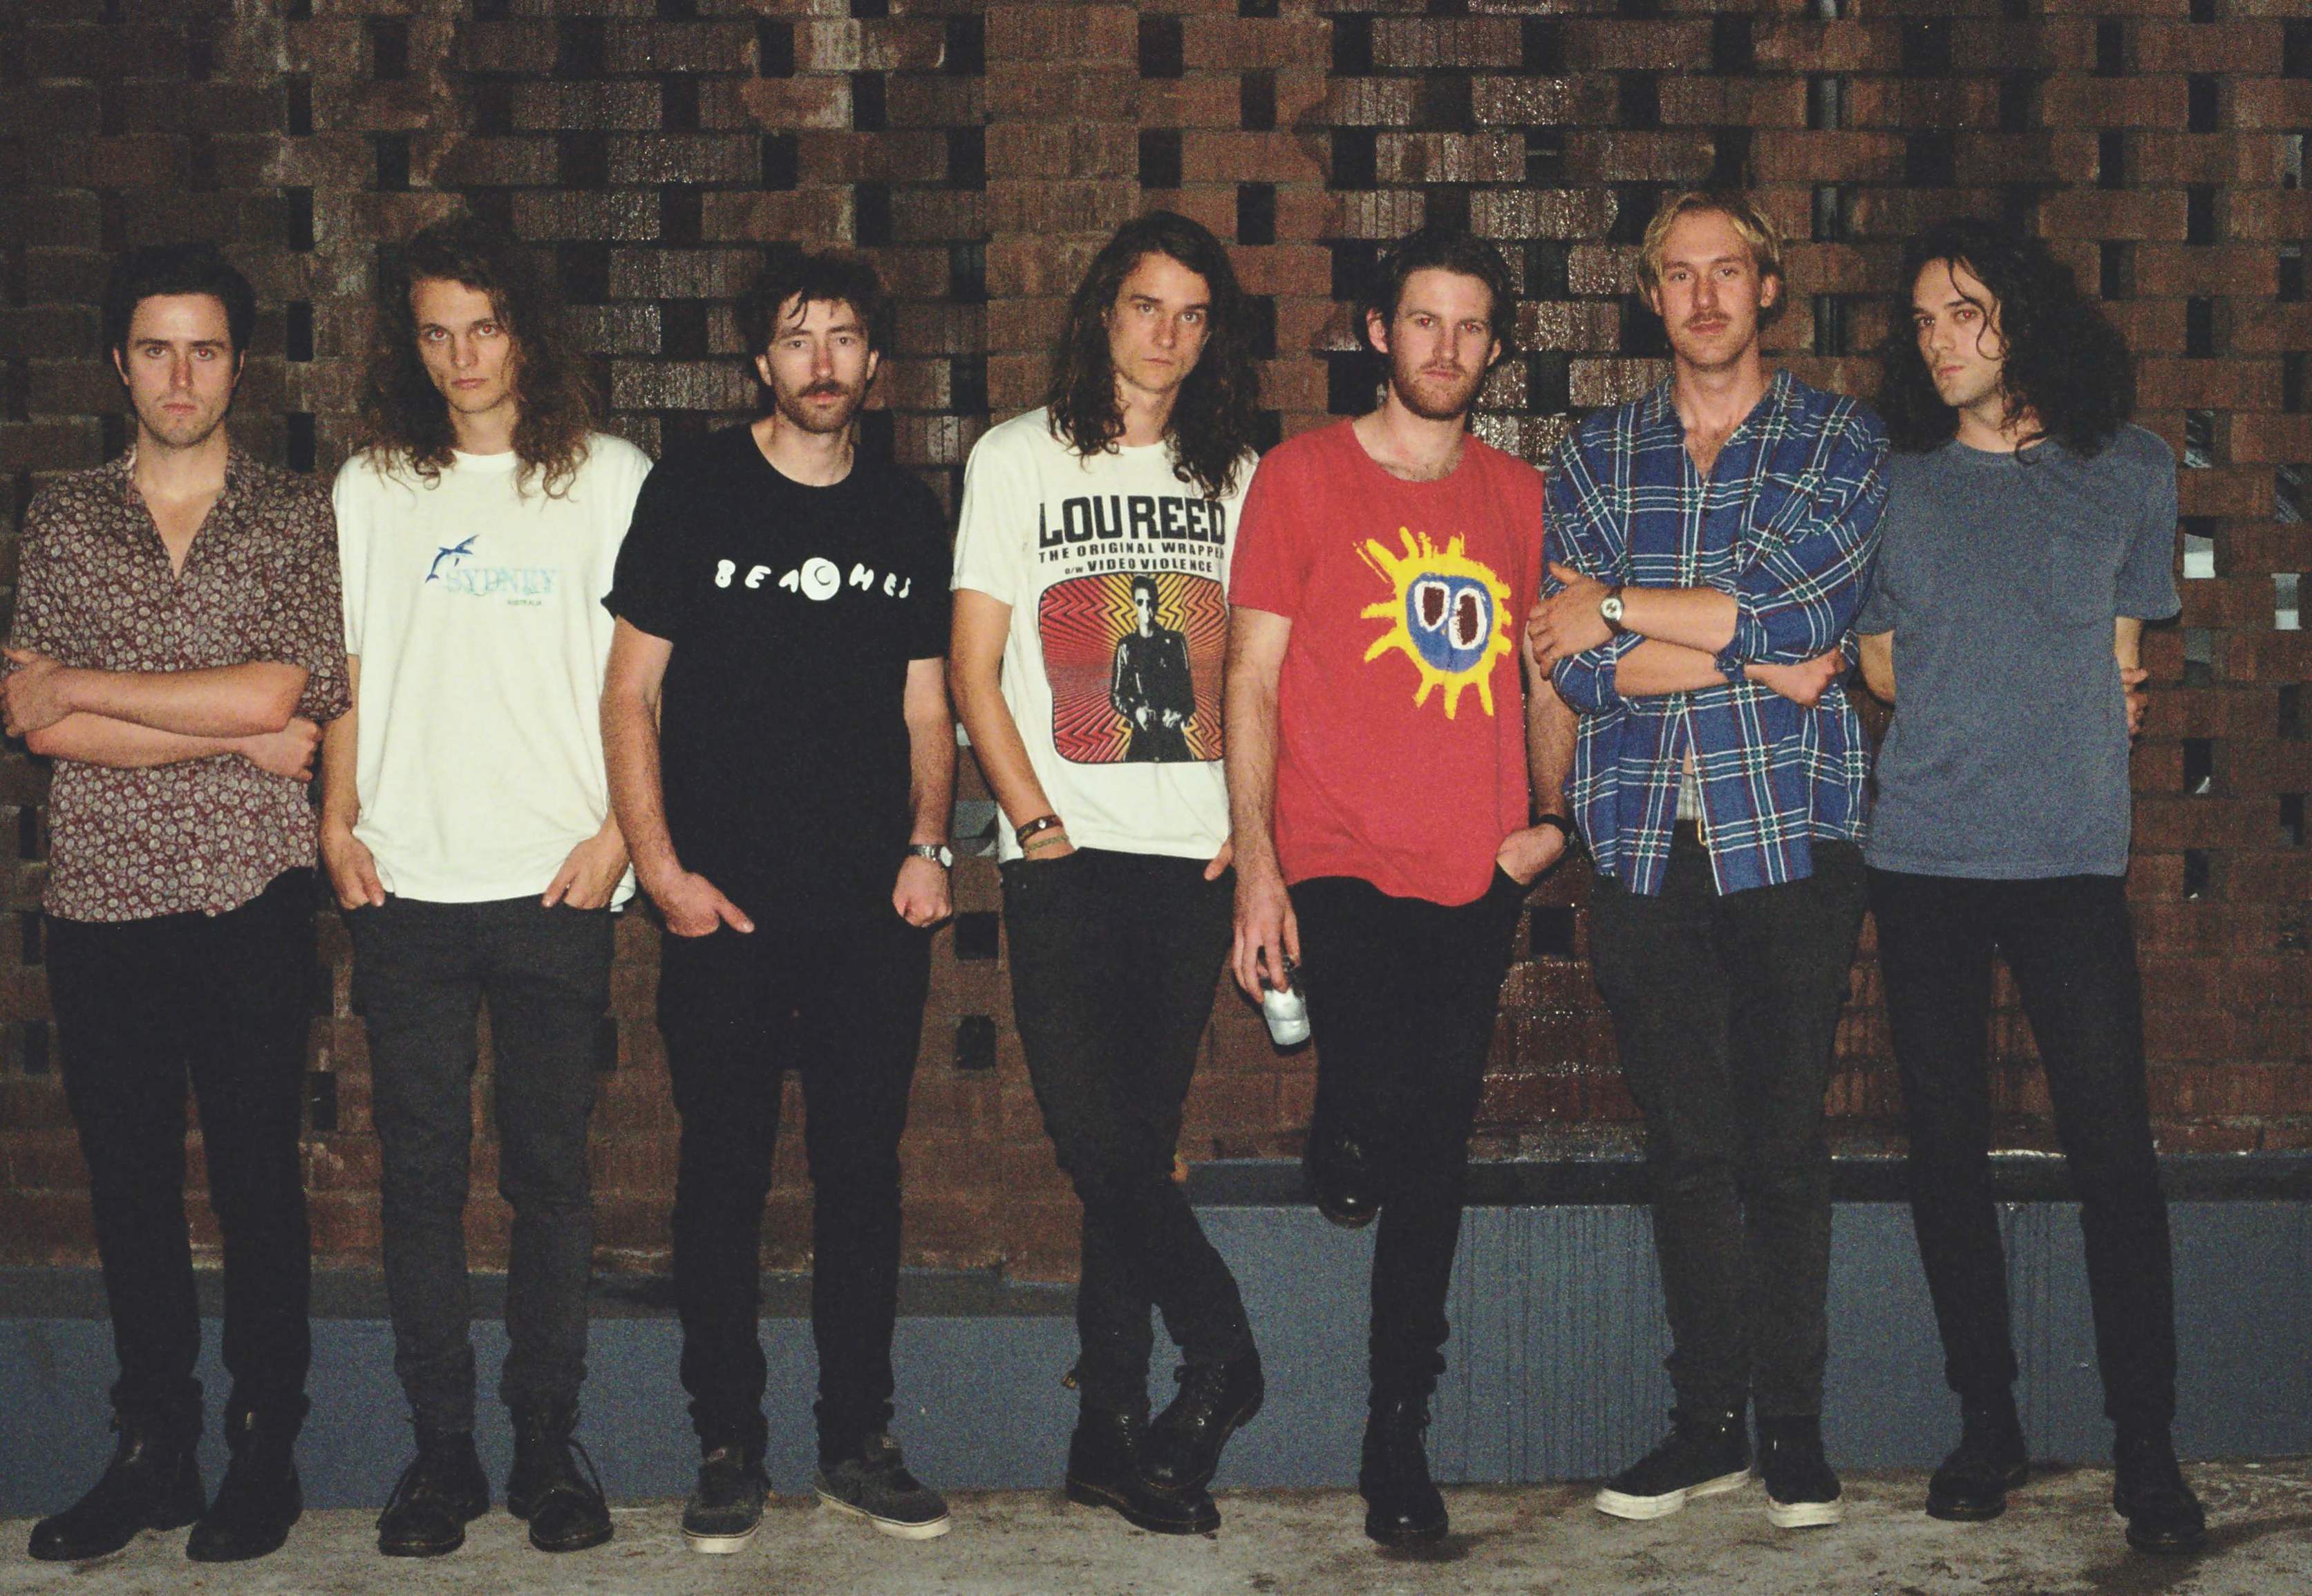 King Gizzard Live Concert Film Comes to Tulsa